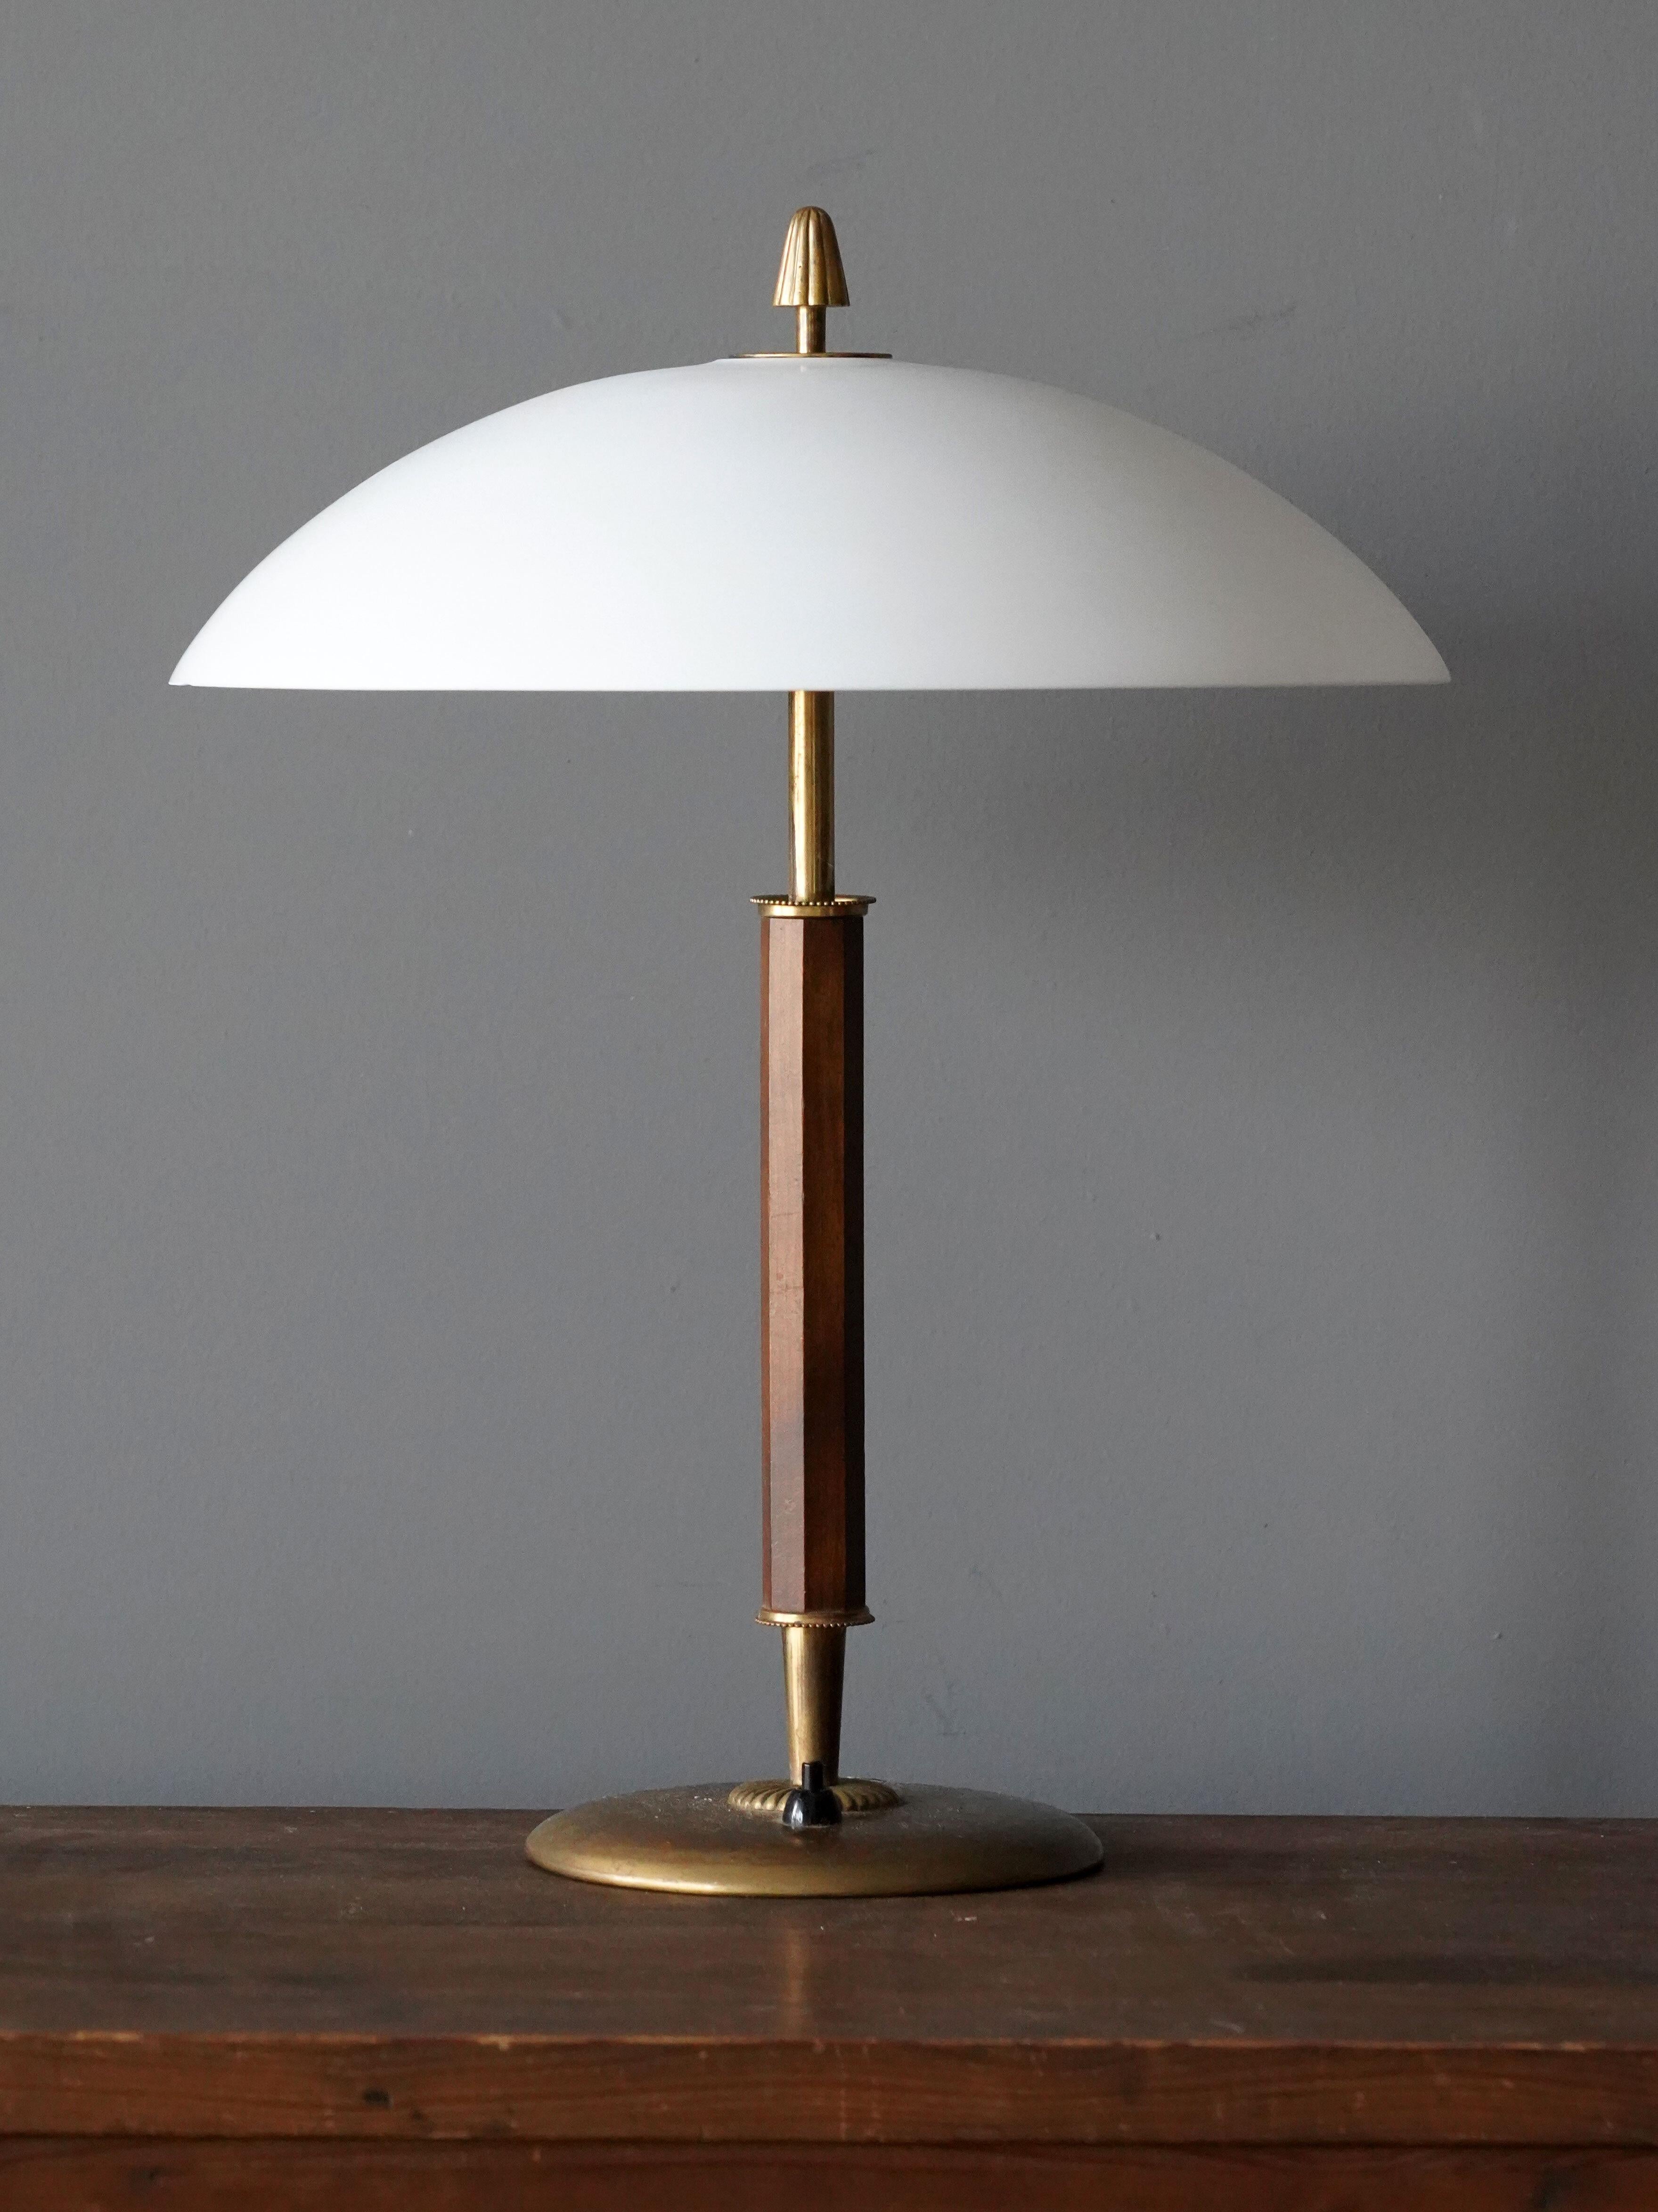 An early modernist table lamp. In brass and stained oak with inlays. Produced in Sweden, 1940s.

Other designers of the period include Paavo Tynell, Lisa Johansson-Pape, Carl-Axel Acking, and Gunnar Asplund.